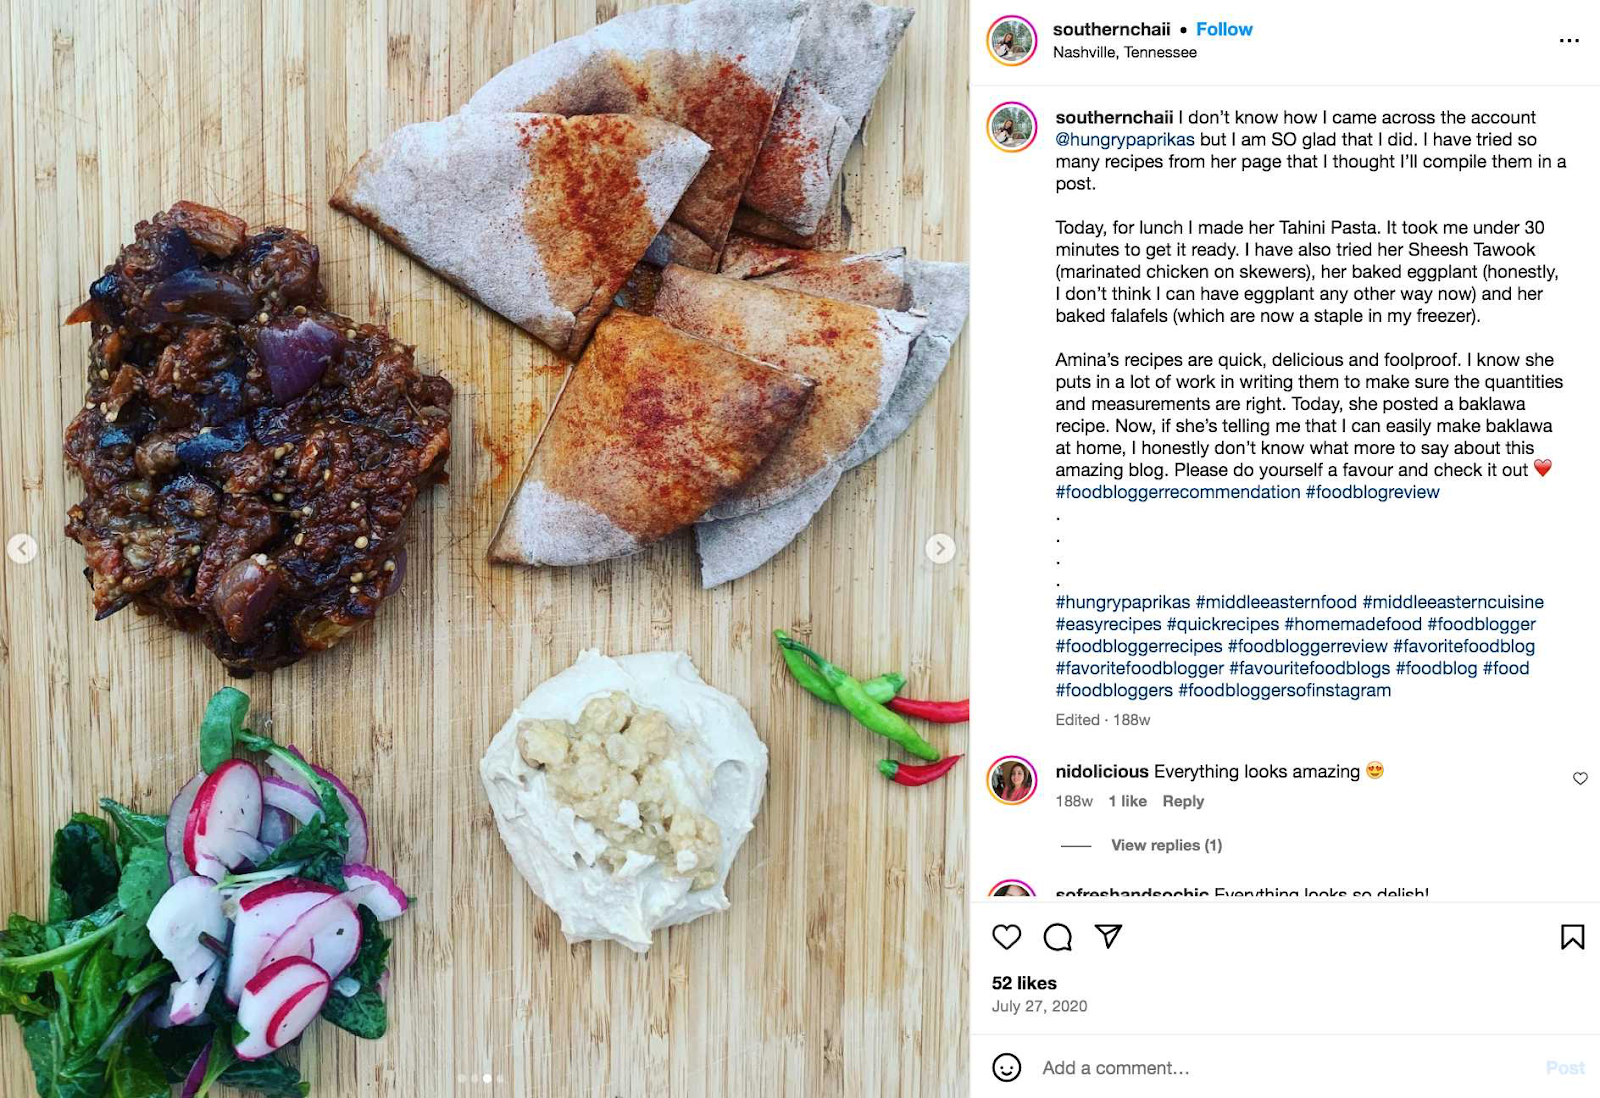 @southernchaii Instagram post mentioning a recipe from the food blog Hungry Paprikas